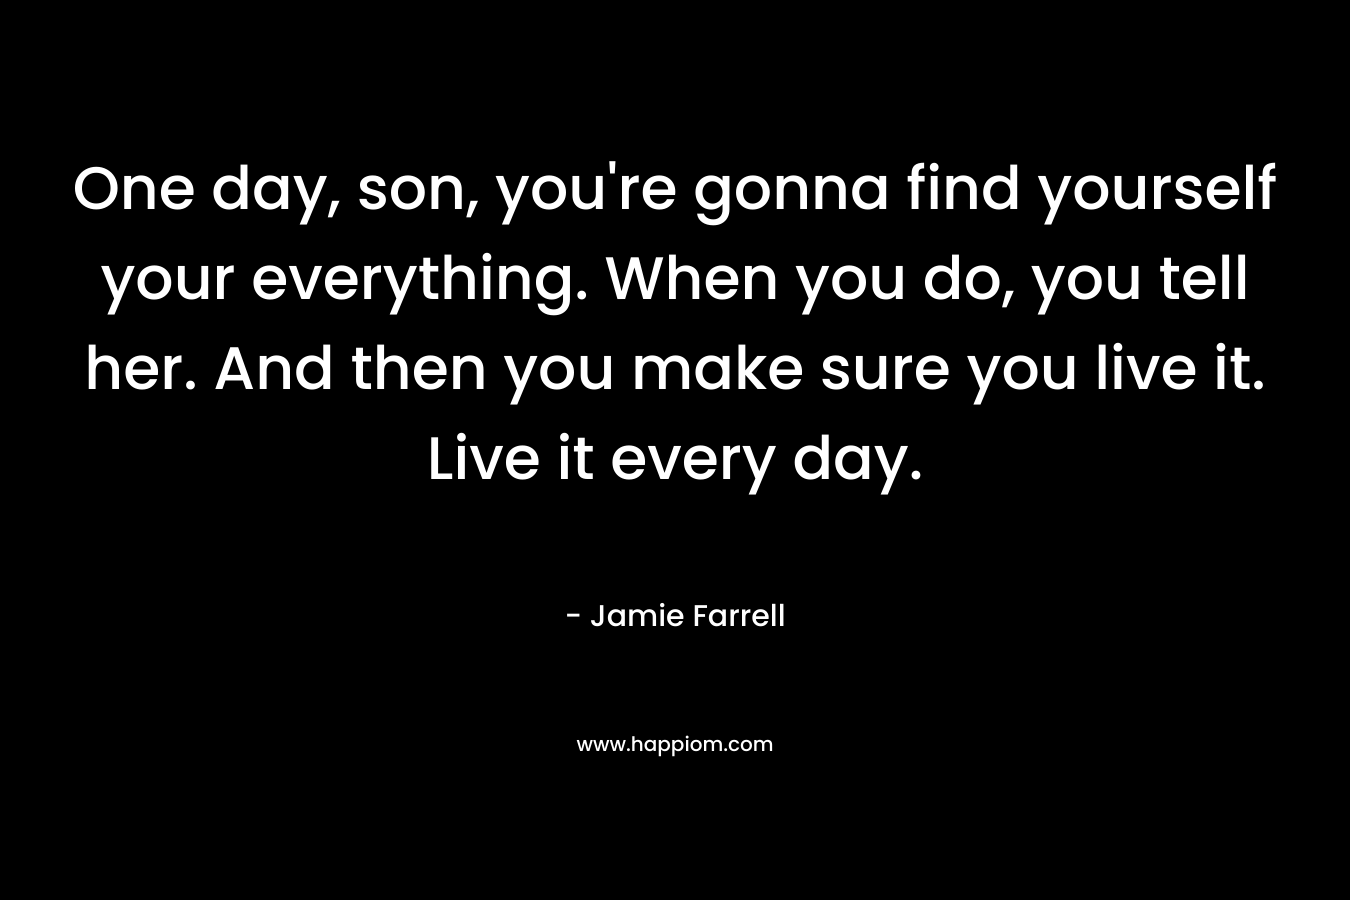 One day, son, you’re gonna find yourself your everything. When you do, you tell her. And then you make sure you live it. Live it every day. – Jamie Farrell